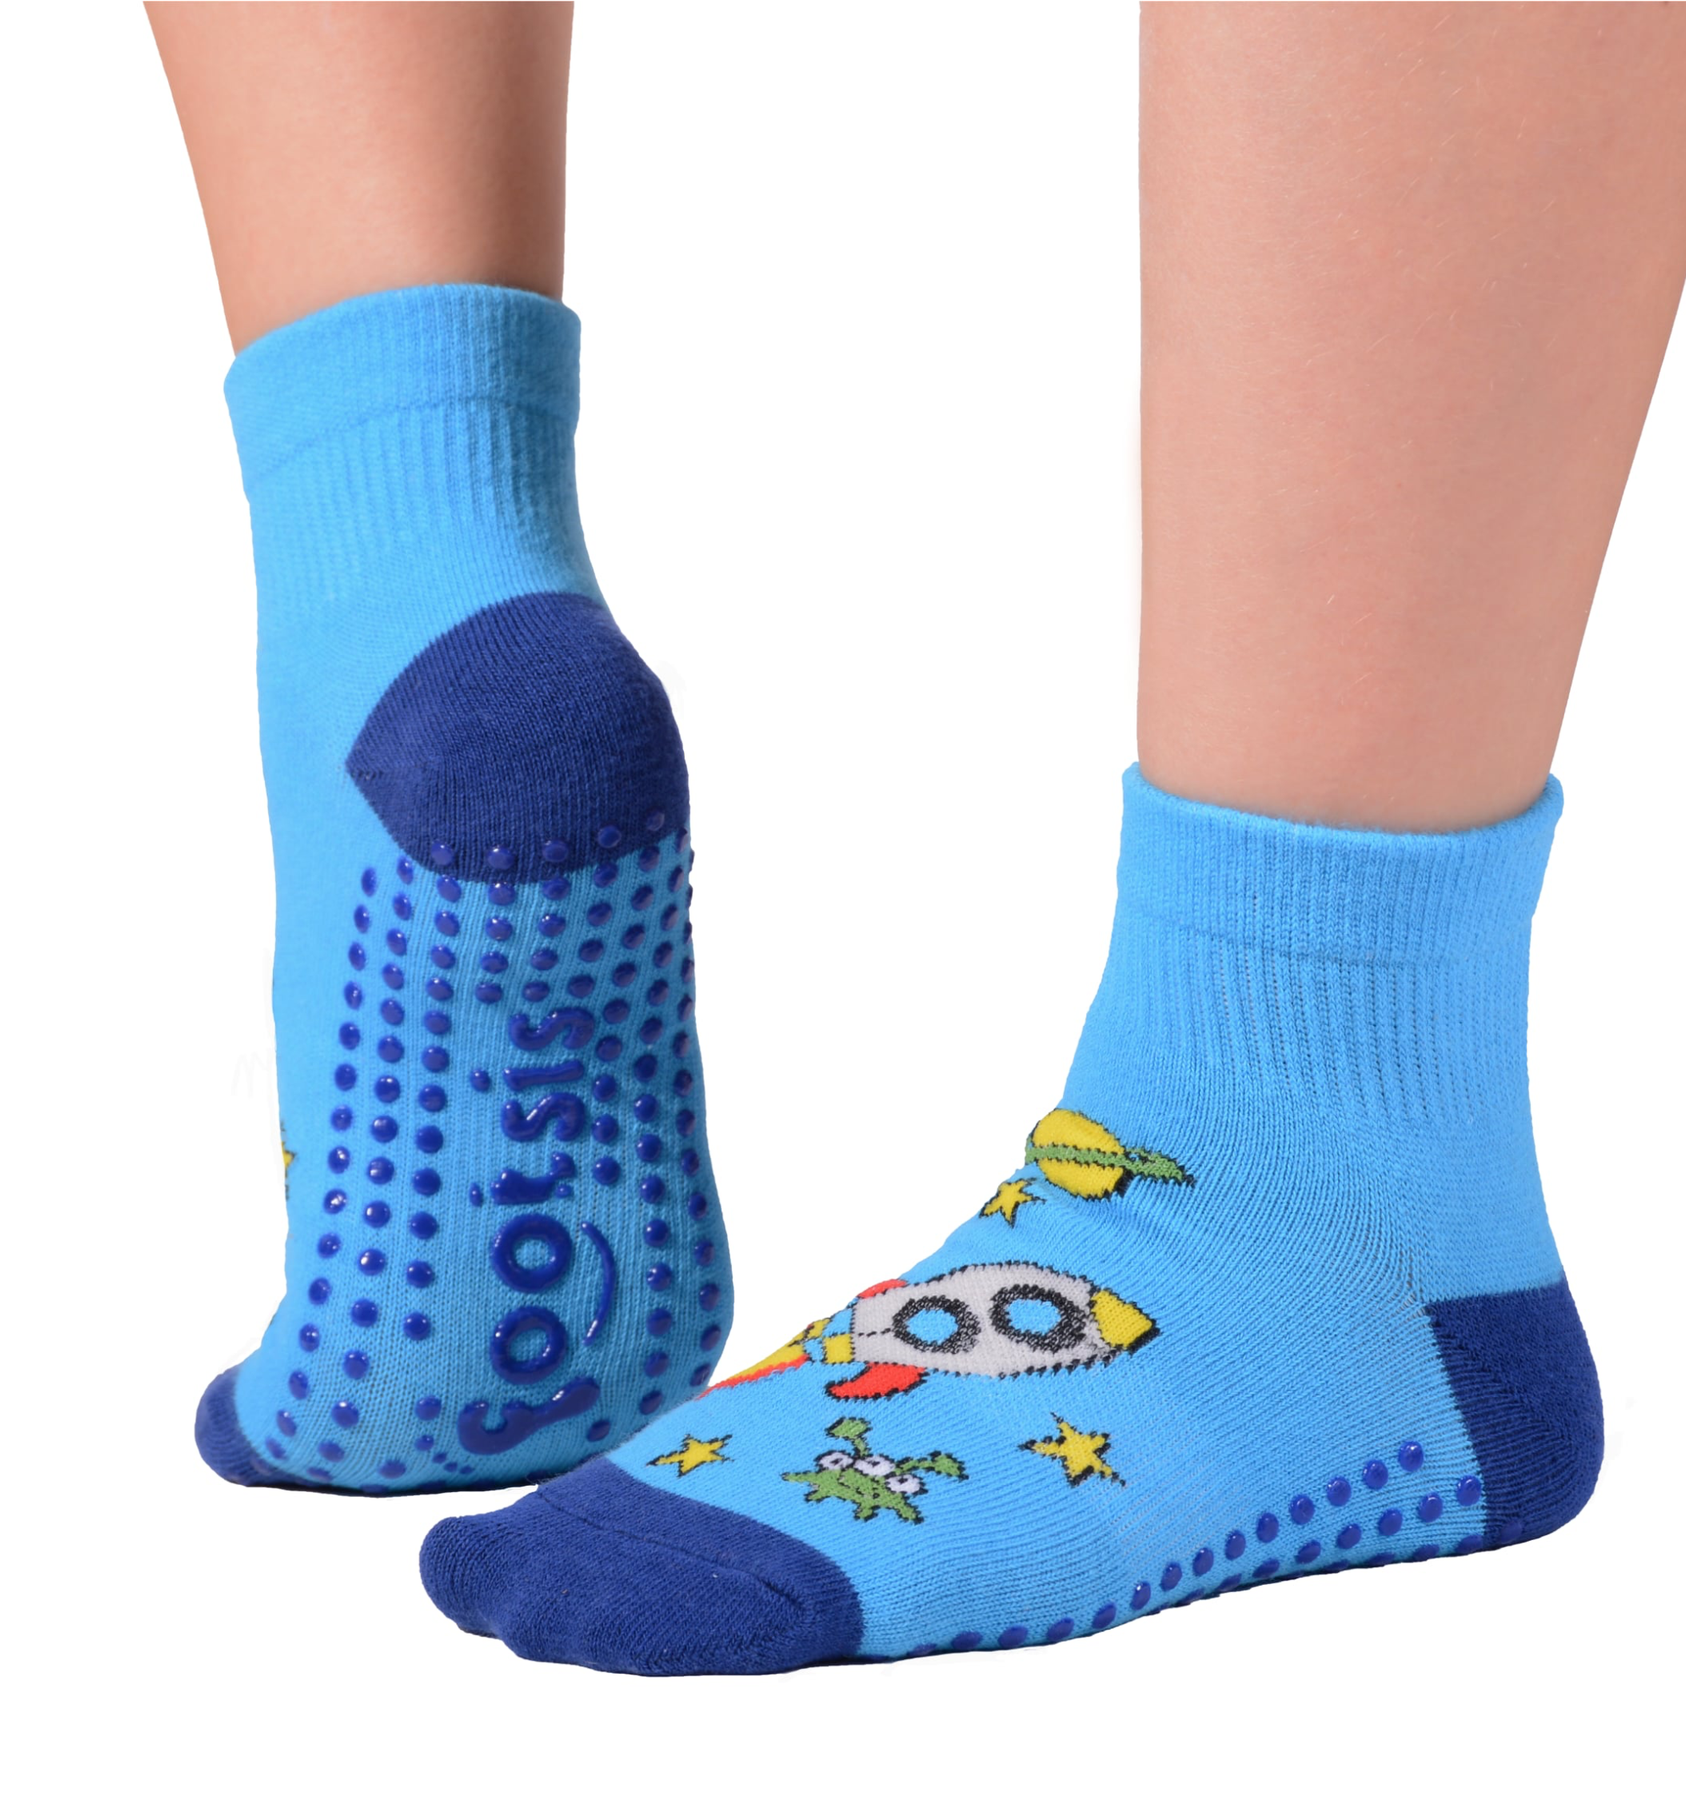 FOOTSIS Non Slip Grip Socks for Yoga, Pilates, Barre, Home, Hospital ,Mommy  and Me classes 'Rocket